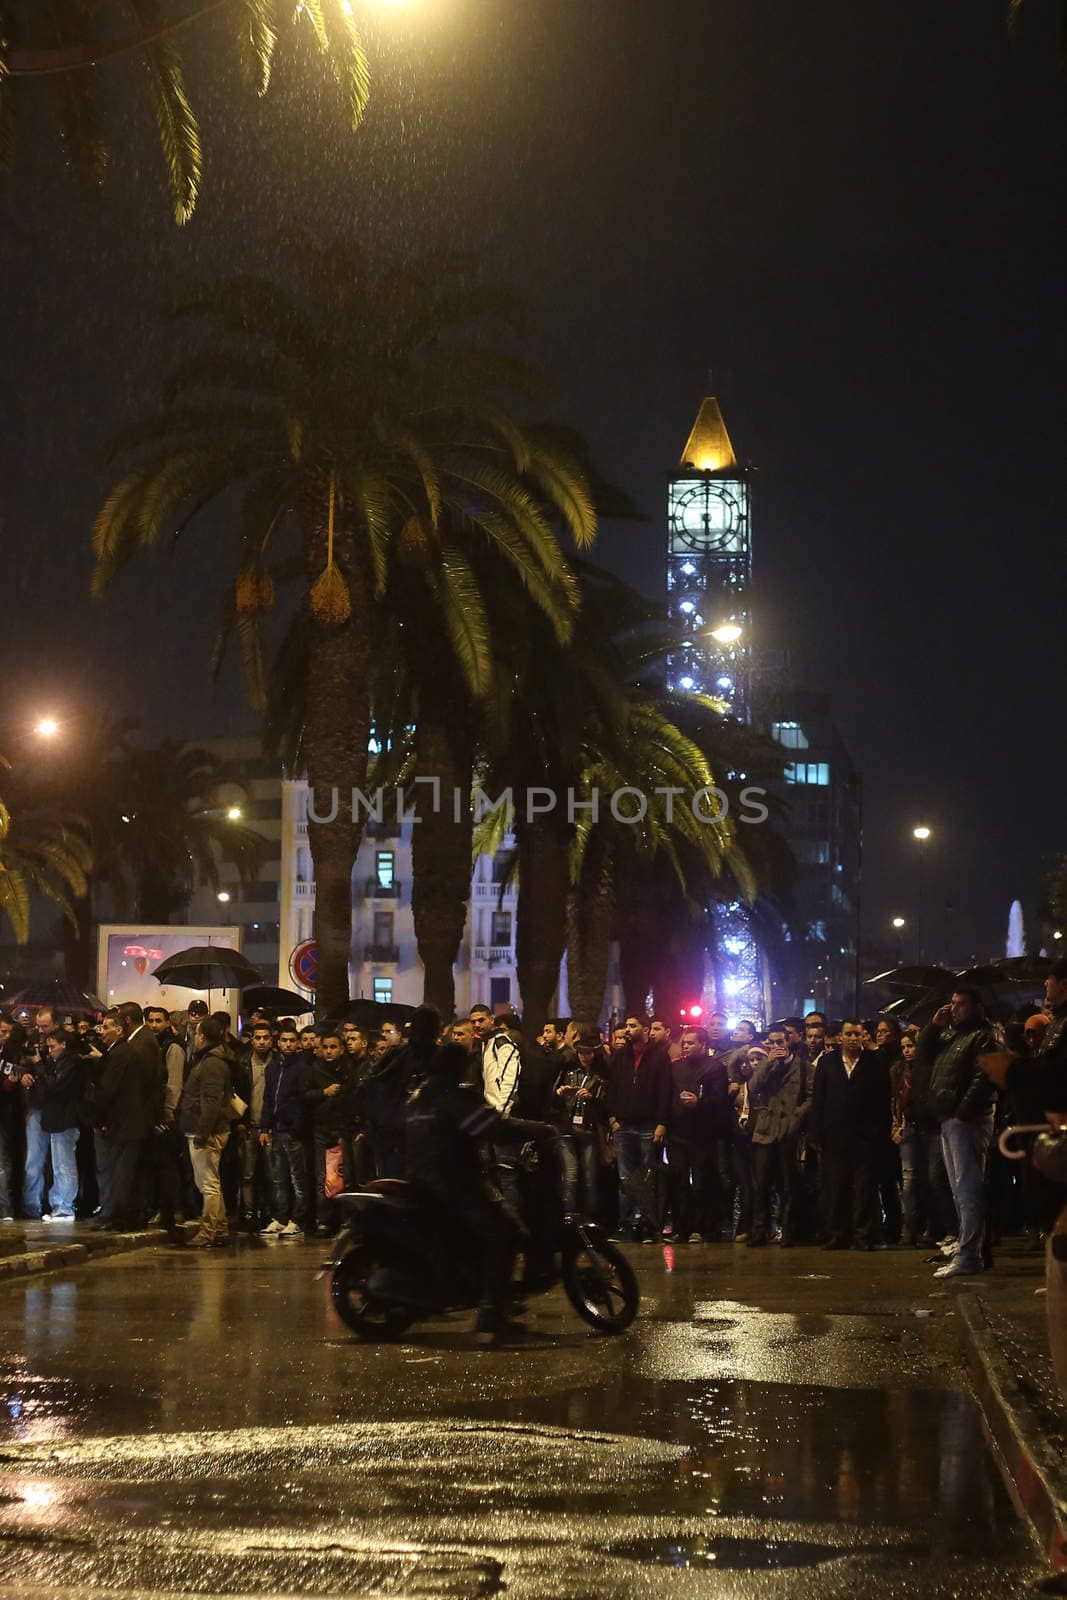 TUNISIA, Tunis: A crowd has formed as police and medical crews are on the scene of an explosion in Tunis, Tunisia that killed at least 12 people aboard a military bus on November 24, 2015. The bus was transporting members of the presidential guard when a bomb exploded just before 5pm local time; and was reportedly parked near the street Habib Bourguiba, where Tunisia's Interior Ministry and French Embassy are situated.